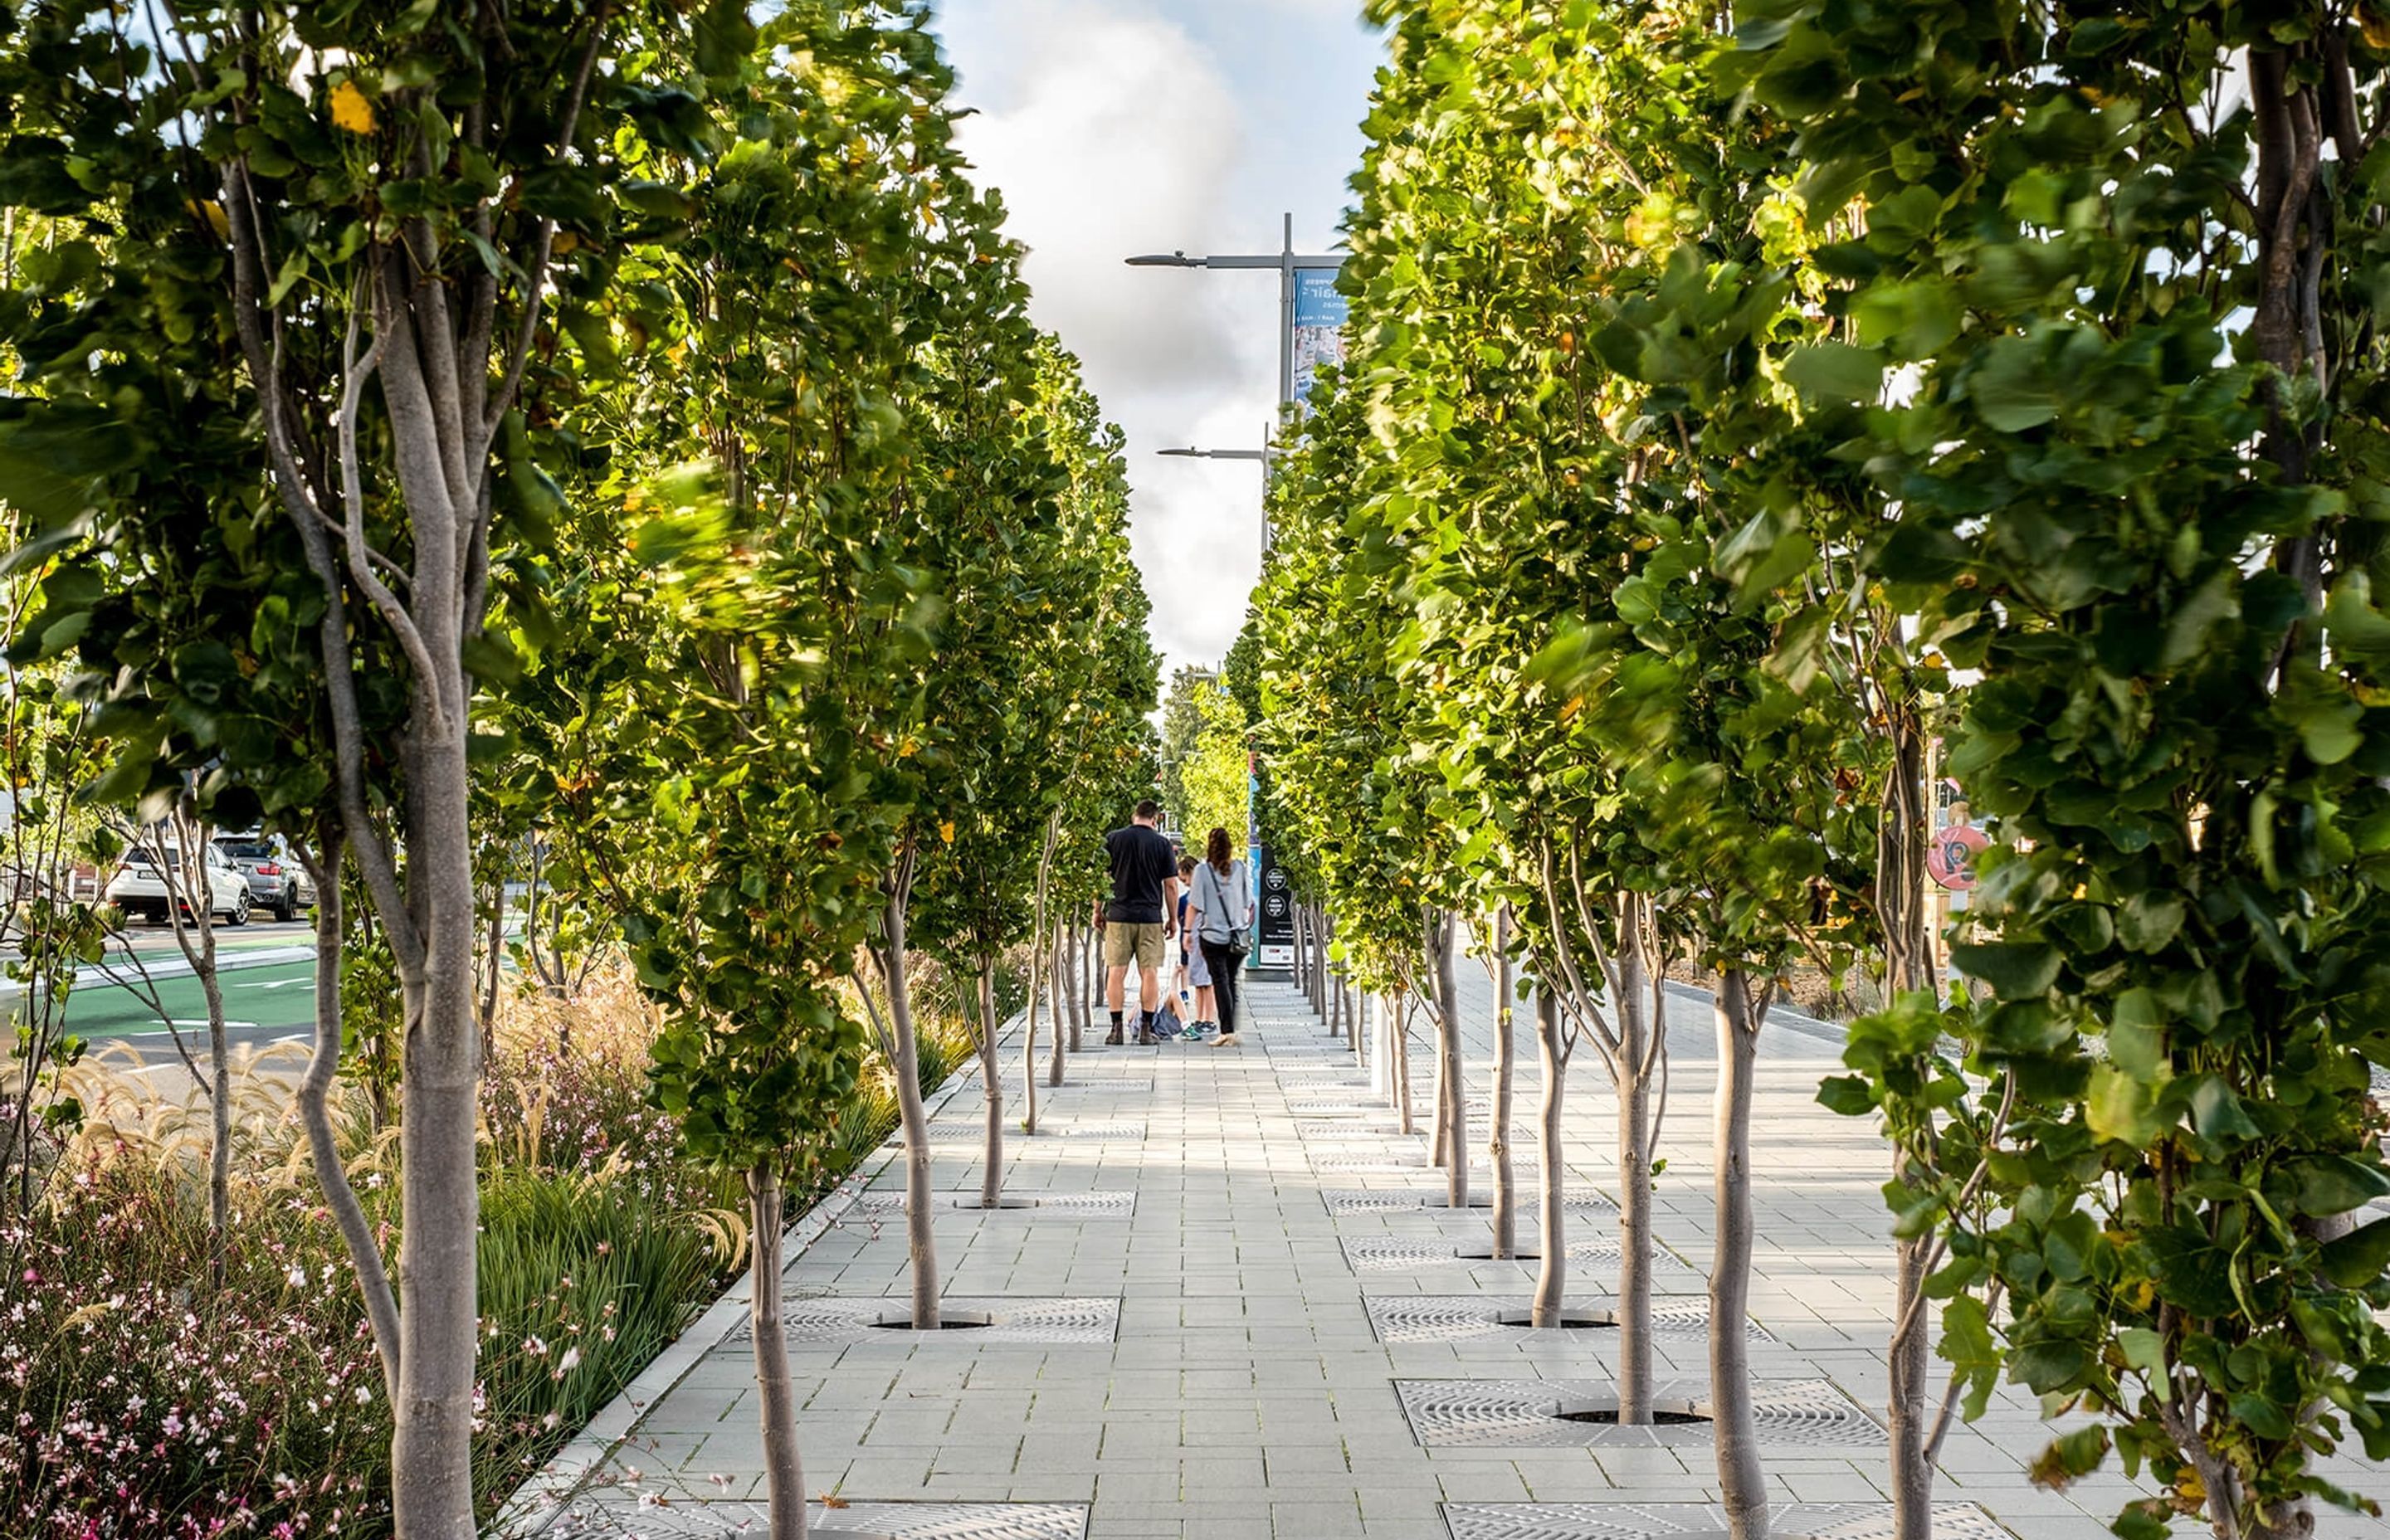 Jasmax reimagines over 75,000m² of Christchurch's travel network and public realm, providing the foundation for a healthier and safer city centre that aims to triple cycle and pedestrian movement by 2041 in line with increasing population growth.